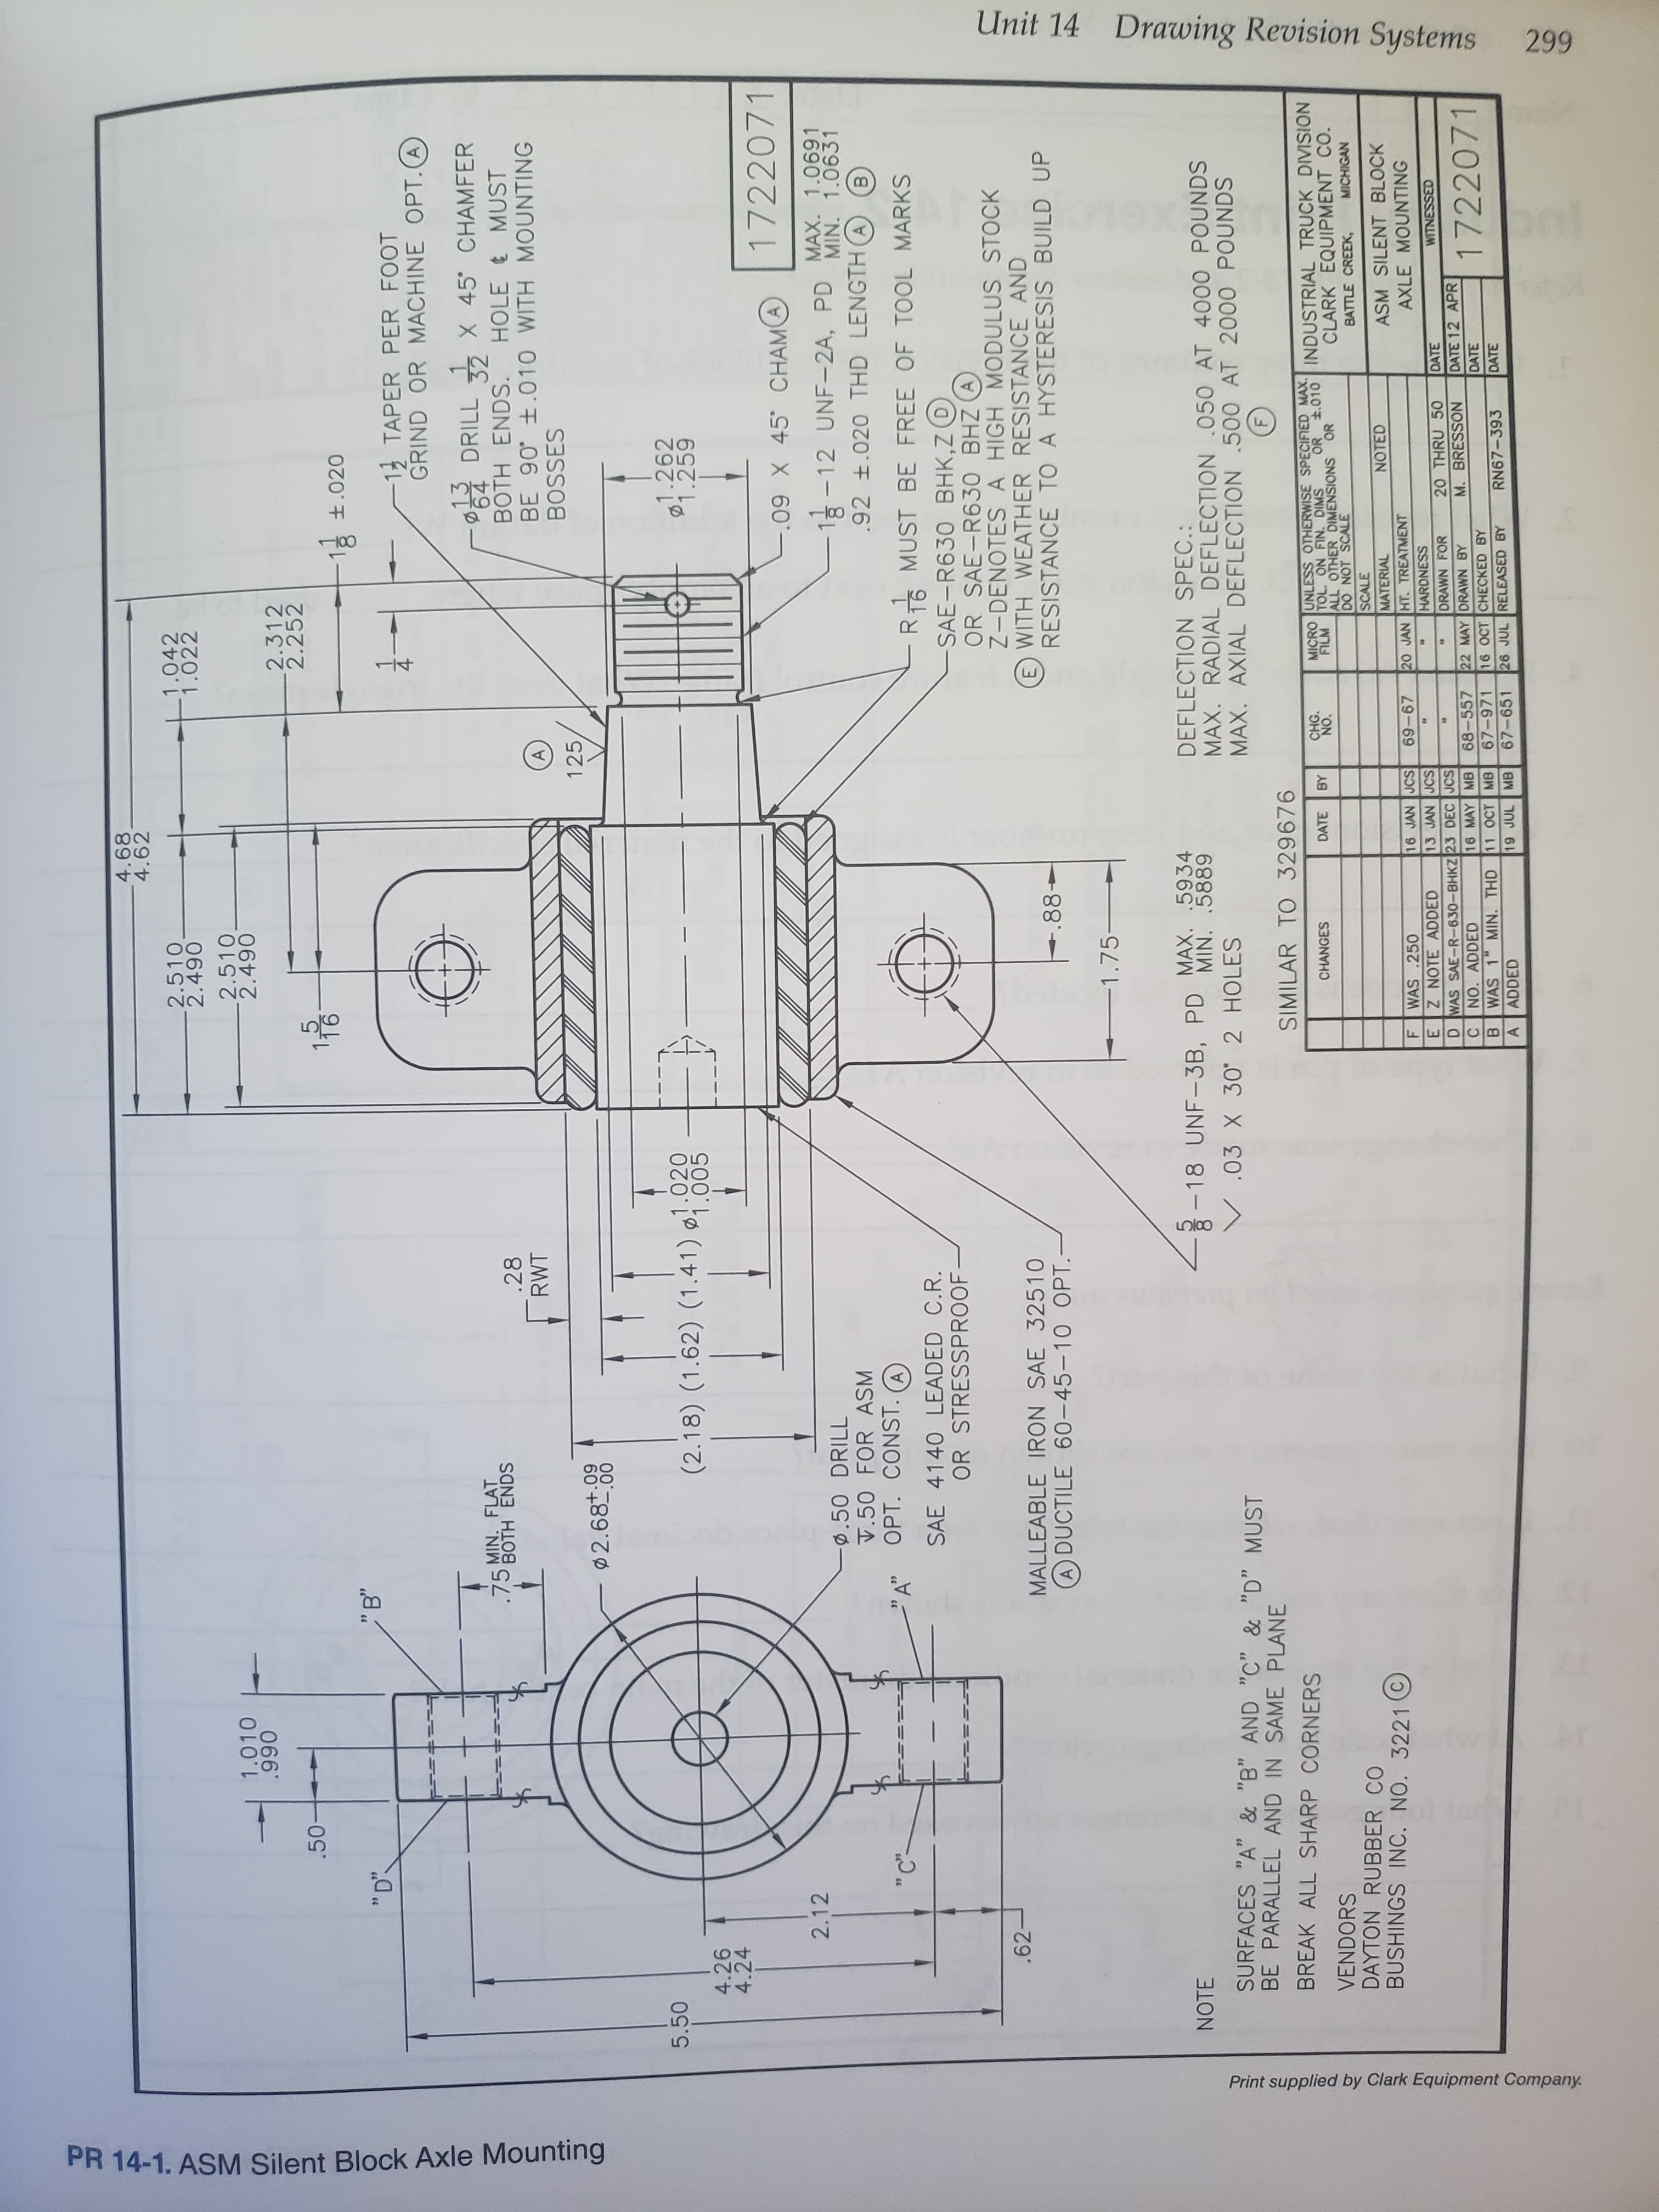 Unit 14 Drawing Revision Systems
299
114
Print supplied by Clark Equipment Company
PR 14-1. ASM Silent Block Axle Mounting
4.68
4.62
2.510
2.490
2.510
2.490
1.042
1.022
1.010
066
2.312
2.252
0
-1 t.020
"B"
-12 TAPER PER FOOT
GRIND OR MACHINE OPT.(A
DDRILL X 45 CHAMFER
BOTH ENDS
BE 90 t.010 WITH MOUNTING
BOSSES
MIN. FLAT
.75 BOTH ENDS
32
HOLE MUST
.28
RWT
125
2.68+.09
000
5.50
(2.18) (1.62) (1.41) 005
1.020
1.262
1.259
4.26
4.24
1722071
-.09 X 45 CHAMA
2.12
-ø.50 DRILL
V.50 FOR ASM
OPT. CONST.
12-12 UNF-2A, PD
.92 t.020 THD LENGTH (A
MAX. 1.0691
MIN. 1.0631
"A"
- R MUST BE FREE OF TOOL MARKS
-SAE-R630 BHK,Z D
OR SAE-R630 BHZ A
Z-DENOTESA HIGH MODULUS STOCK
E WITH WEATHER RESISTANCE AND
RESISTANCE TO A HYSTERESIS BUILD UP
SAE 4140 LEAD ED C.R.
OR STRESSPROOF
.62
MALLEABLE IRON SAE 32510
A DUCTILE 60-45-10 OPT.
+.88
1.75-
-18 UNF-3B, PD
V.03 X 30 2 HOLES
MAX. .5934
MIN. .5889
NOTE
SURFACES "A" & "B" AND "C" & "D" MUST
BE PARALLEL AND IN SAME PLANE
DEFLECTION SPEC.:
MAX. RADIAL DEFLECTION .050 AT 4000 POUNDS
MAX. AXIAL DEFLECTION 500 AT 2000 POUNDS
BREAK ALL SHARP CORNERS
SIMILAR TO 329676
MICRO UNLESS OTHERWISE SPECIFIED MAX.
FILM
OR 010 INDUSTRIAL TRUCK DIVISION
CLARK EQUIPMENT CO.
CHG.
CHANGES
DATE
BY
VENDORS
DAYTON RUBBER CO
BUSHINGS INC. NO. 3221 C
TOL. ON FIN. DIMS
ALL OTHER DIMENSIONS OR
DO NOT SCALE
SCALE
MATERIAL
ON
BATTLE CREEK,
MICHIGAN
NOTED
ASM SILENT BLOCK
20 JAN HT. TREATMENT
WAS .250
Z NOTE ADDED
D WAS SAE-R-630-BHKZ 23 DEC JCS
CNO. ADDED
WAS 1 MIN. THD
A ADDED
16 JAN JCS
AXLE MOUNTING
13 JAN JCS
HARDNESS
ea
20 THRU 50
M. BRESSON
DRAWN FOR
DATE
68-557
67-971
67-651
22 MAY DRAWN BY
16 OCT CHECKED BY
26 JUL RELEASED BY
DATE 12 APR
DATE
DATE
16 MAY MB
1722071
11
ОСТ | МВ
MB
RN67-393
